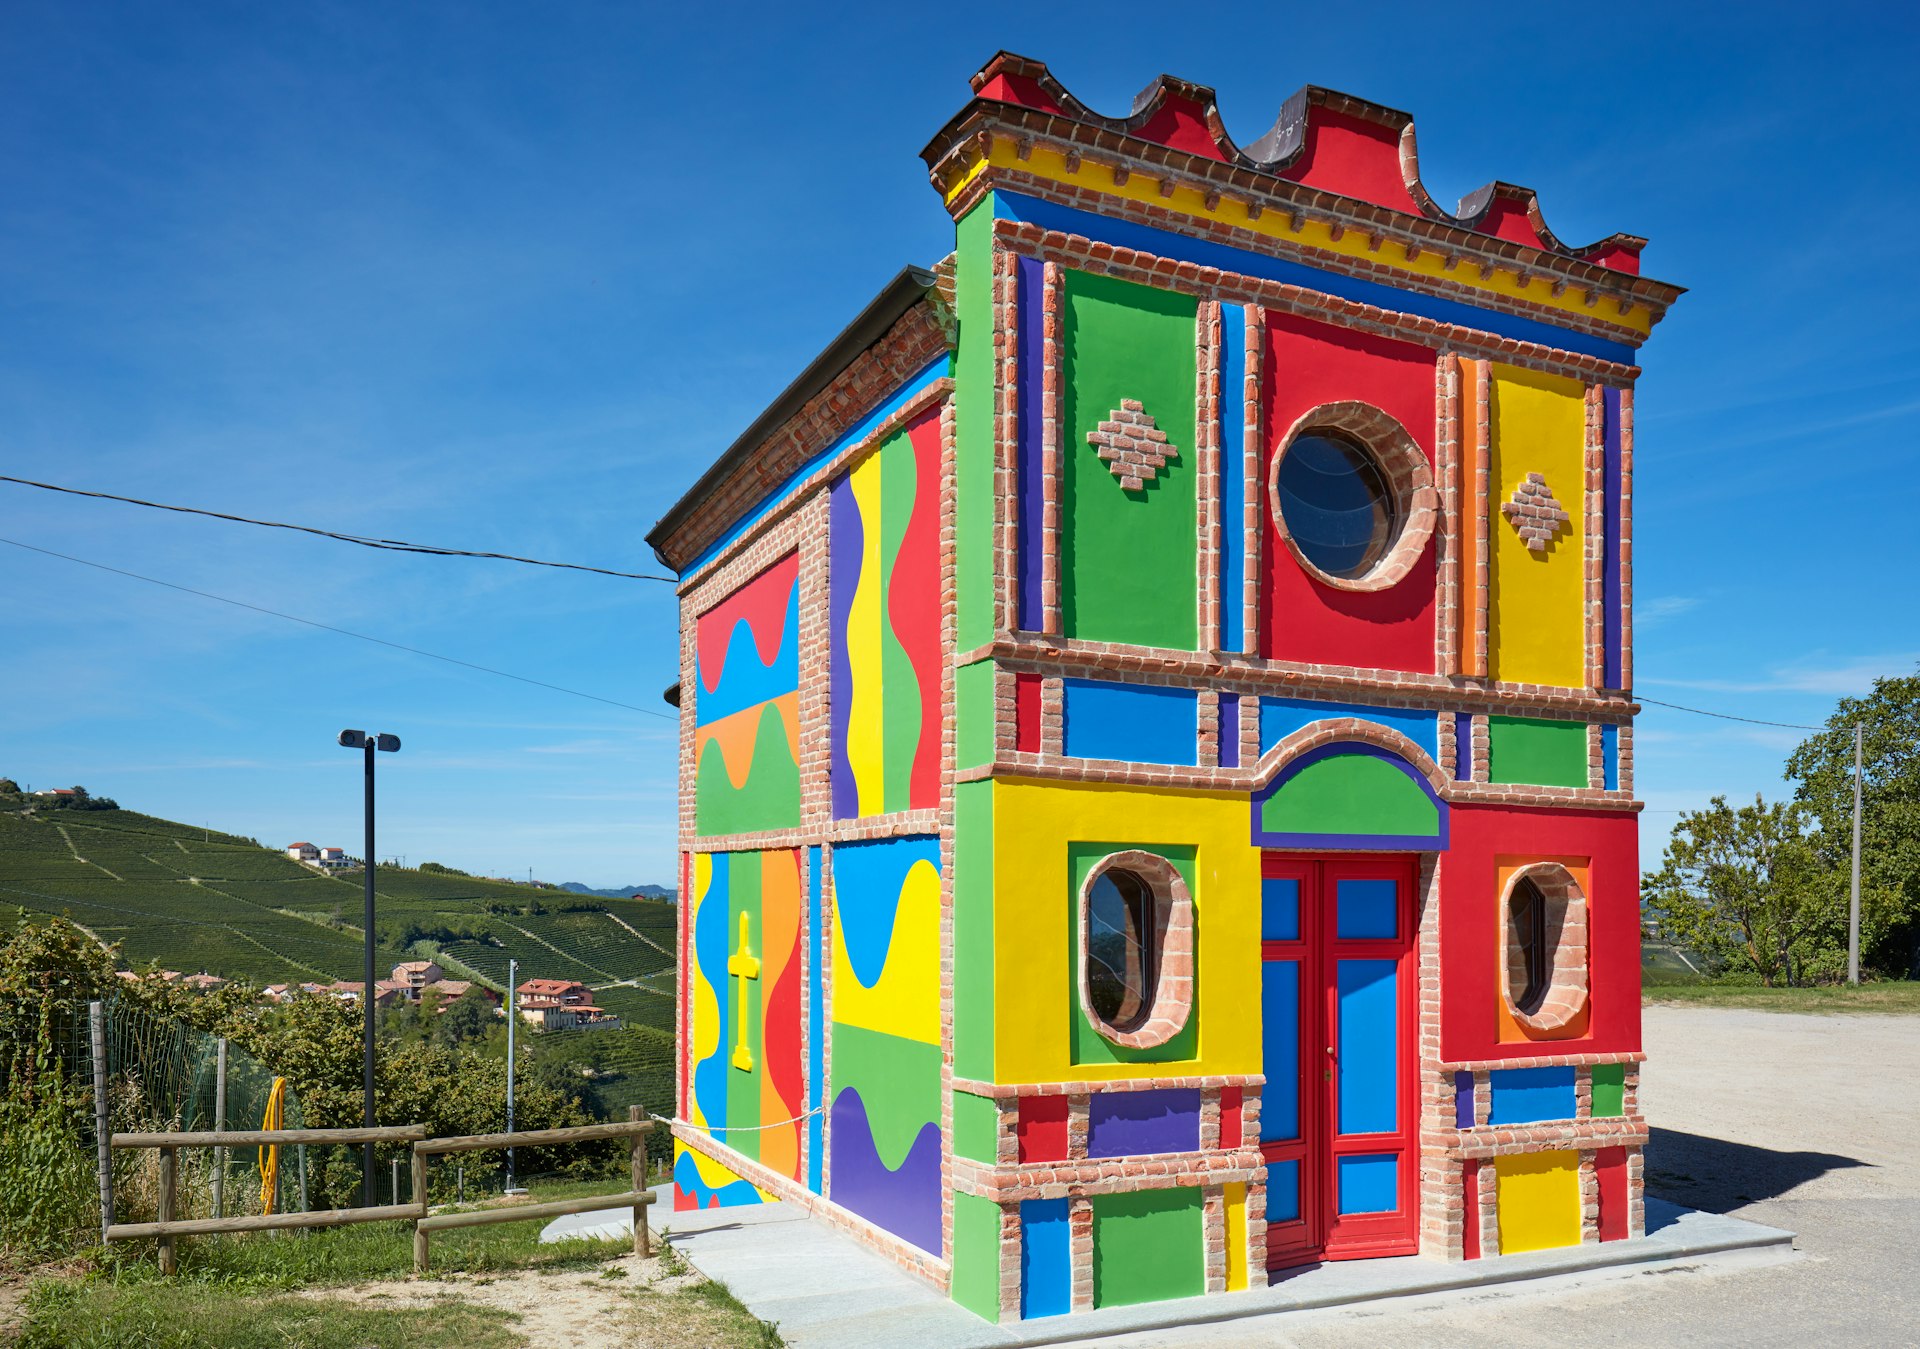 A picture of the colorful Barolo Chapel not too far away from the village